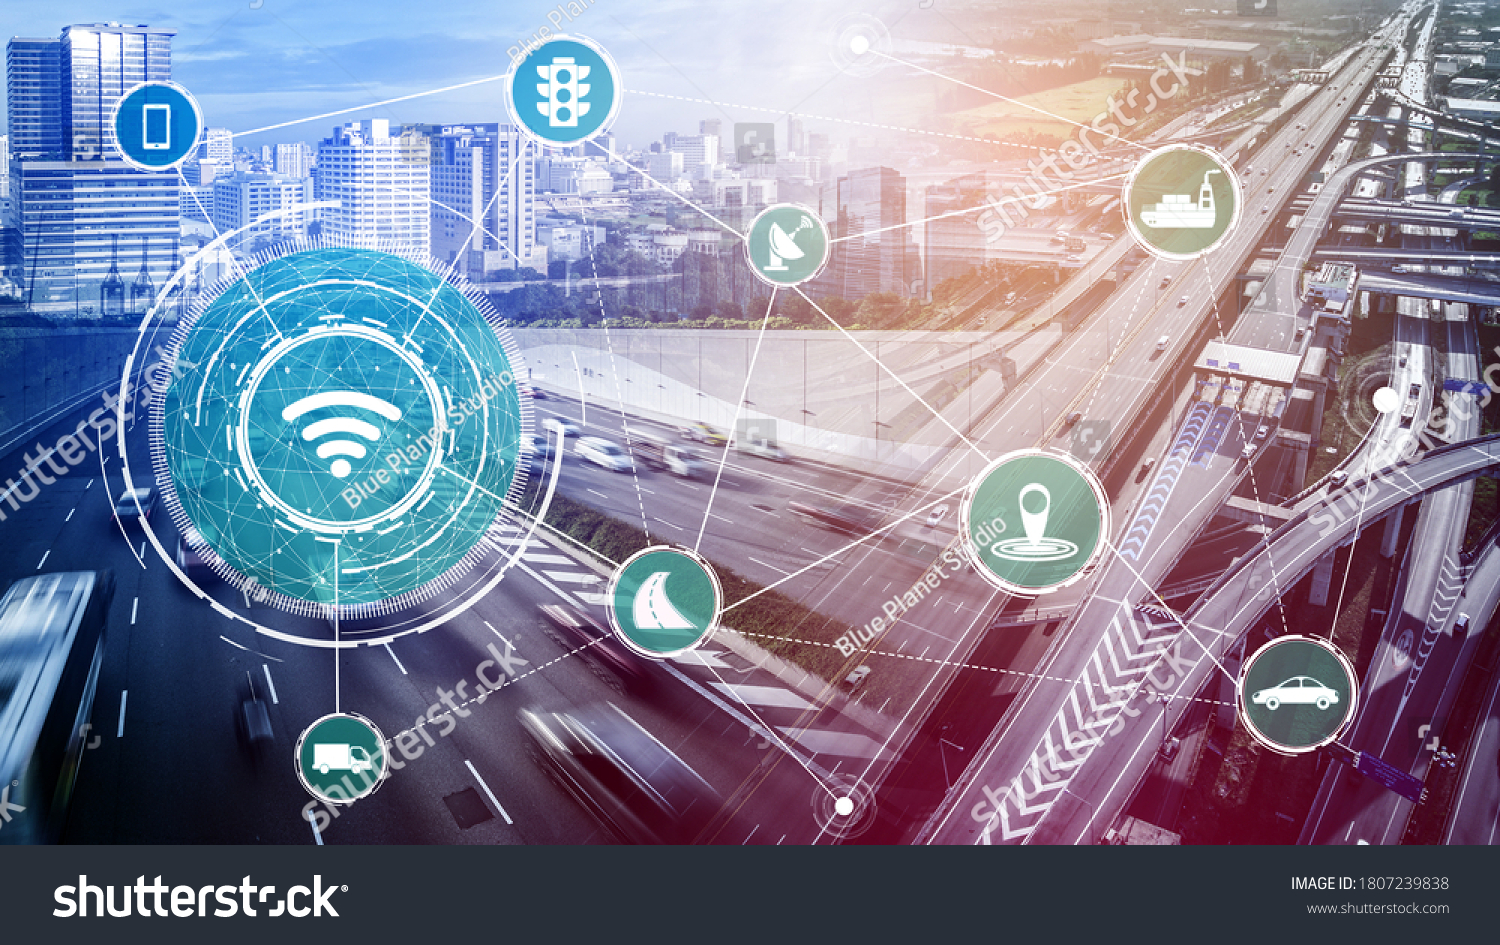 Smart transport technology concept for future car traffic on road . Virtual intelligent system makes digital information analysis to connect data of vehicle on city street . Futuristic innovation . #1807239838